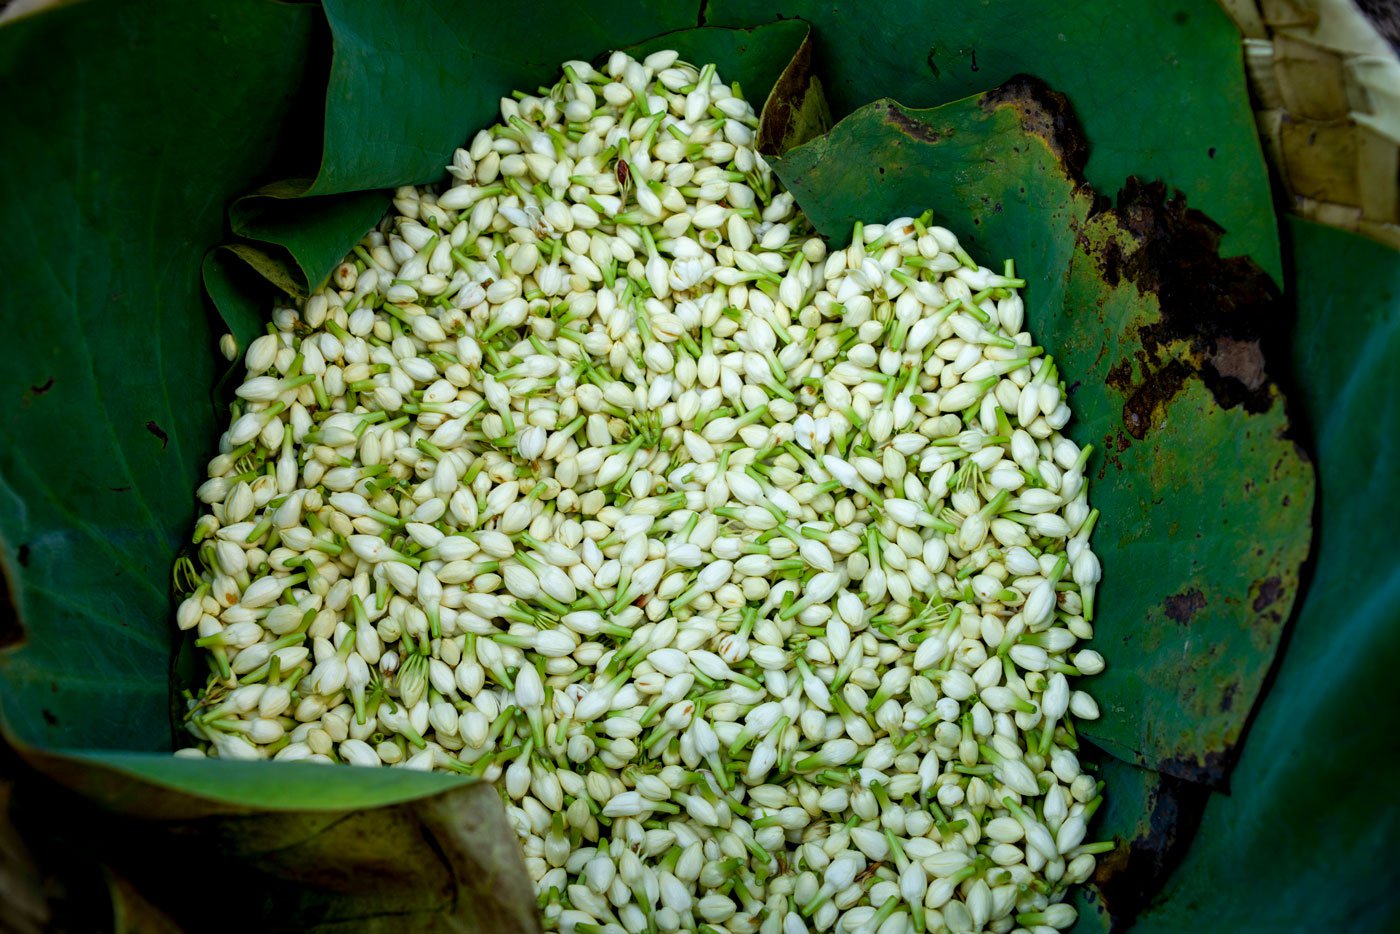 Pearly white jasmine buds on their way to other states from Thovalai market in Kanyakumari district